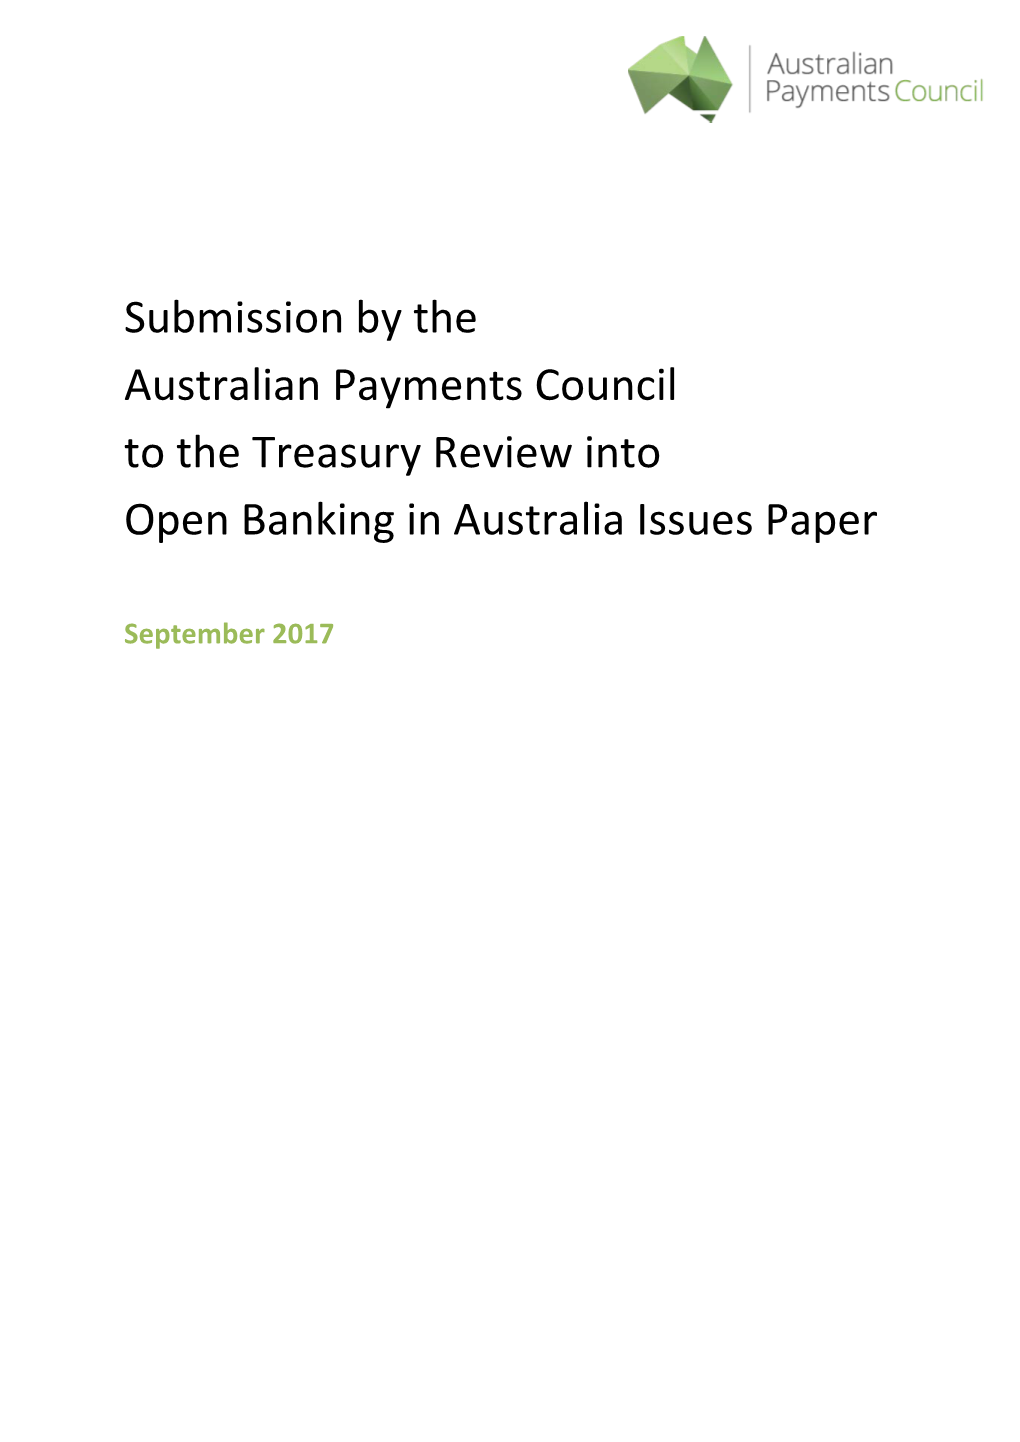 Submission by the Australian Payments Council to the Treasury Review Into Open Banking in Australia Issues Paper